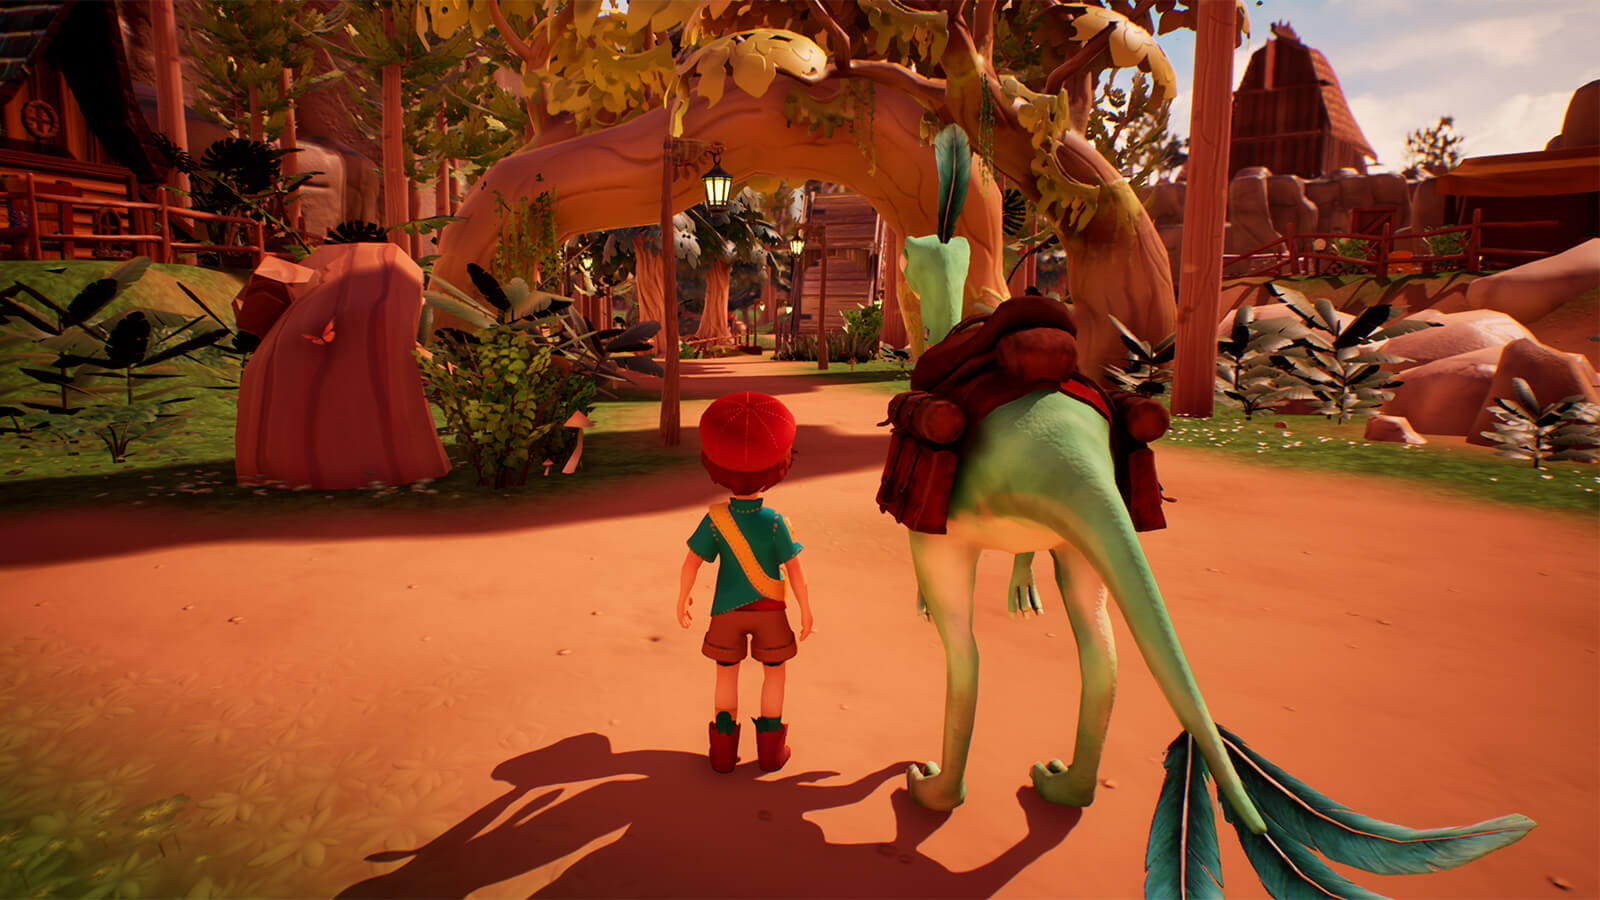 A boy stands next to his saddled-up dinosaur in the town of Cretaceous Cliffs.